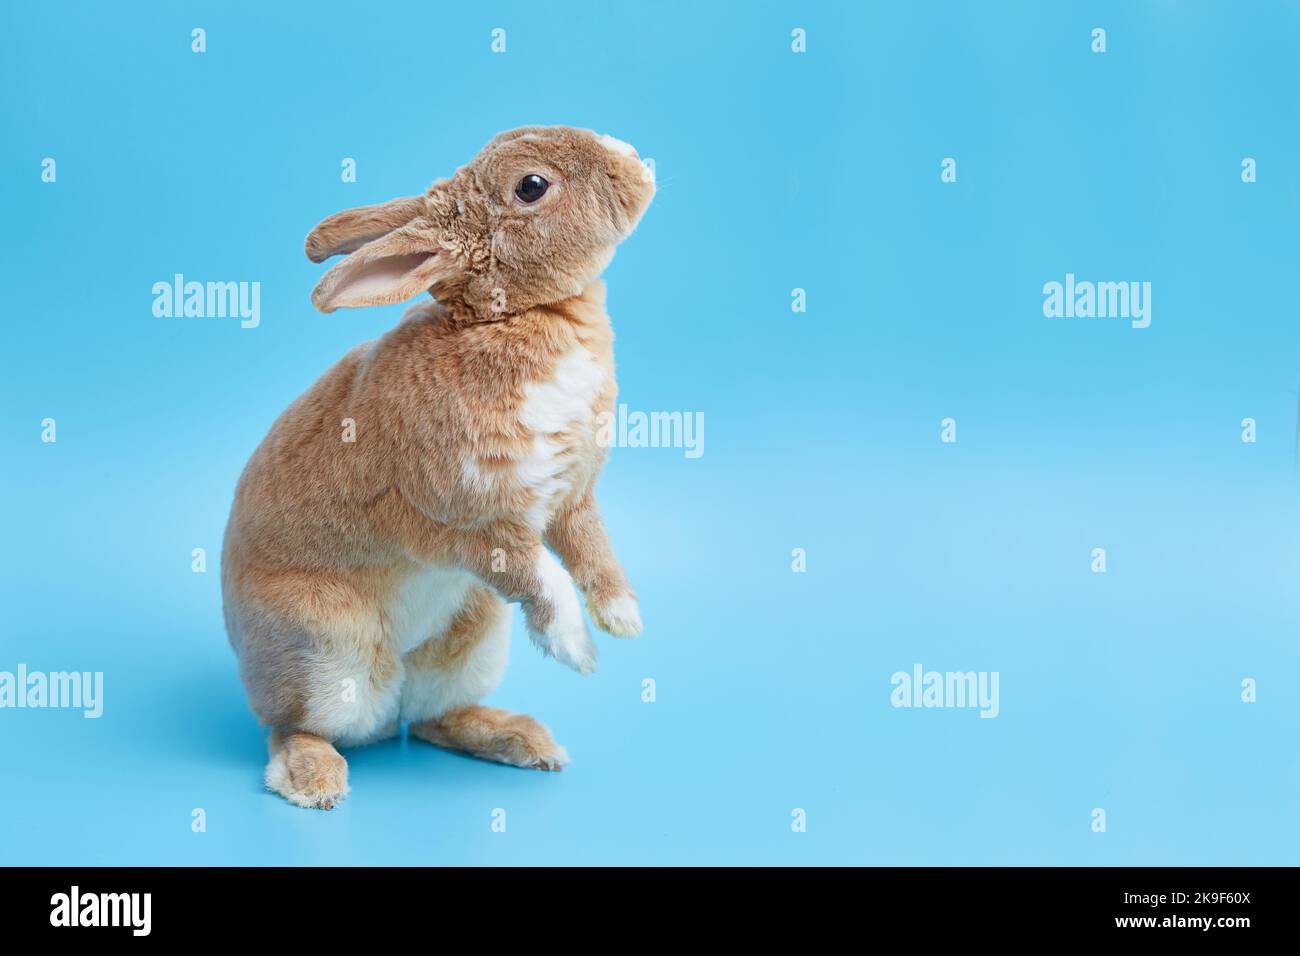 Greeting Easter card with cute bunny and space for text or product. Decorative dwarf rex rabbit on a blue background Stock Photo